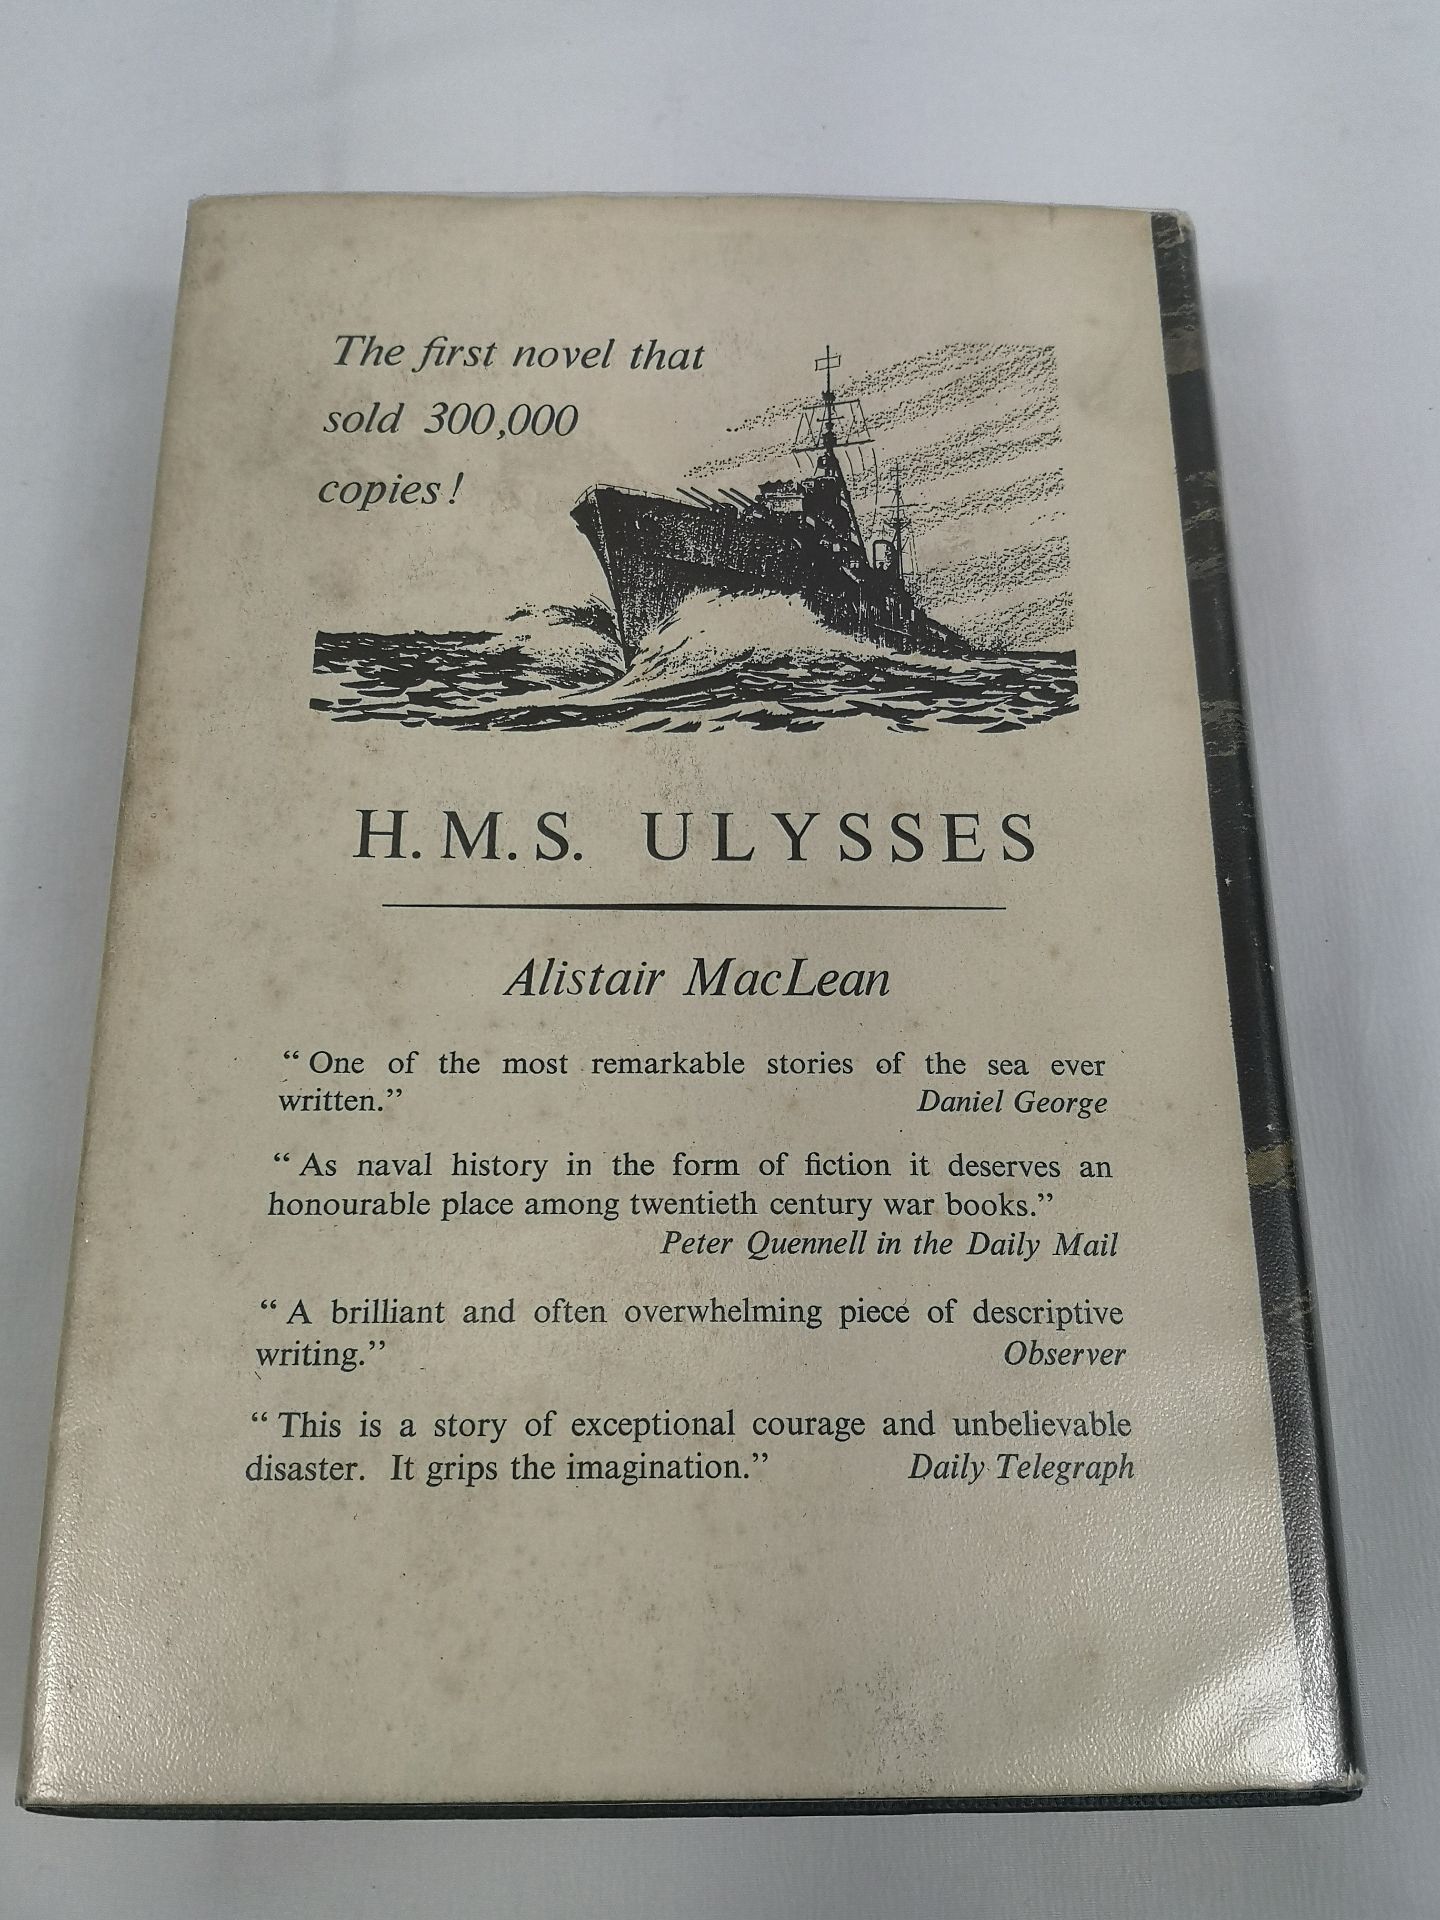 The Guns Of Navarone, Alistair Maclean, first edition. - Image 3 of 5